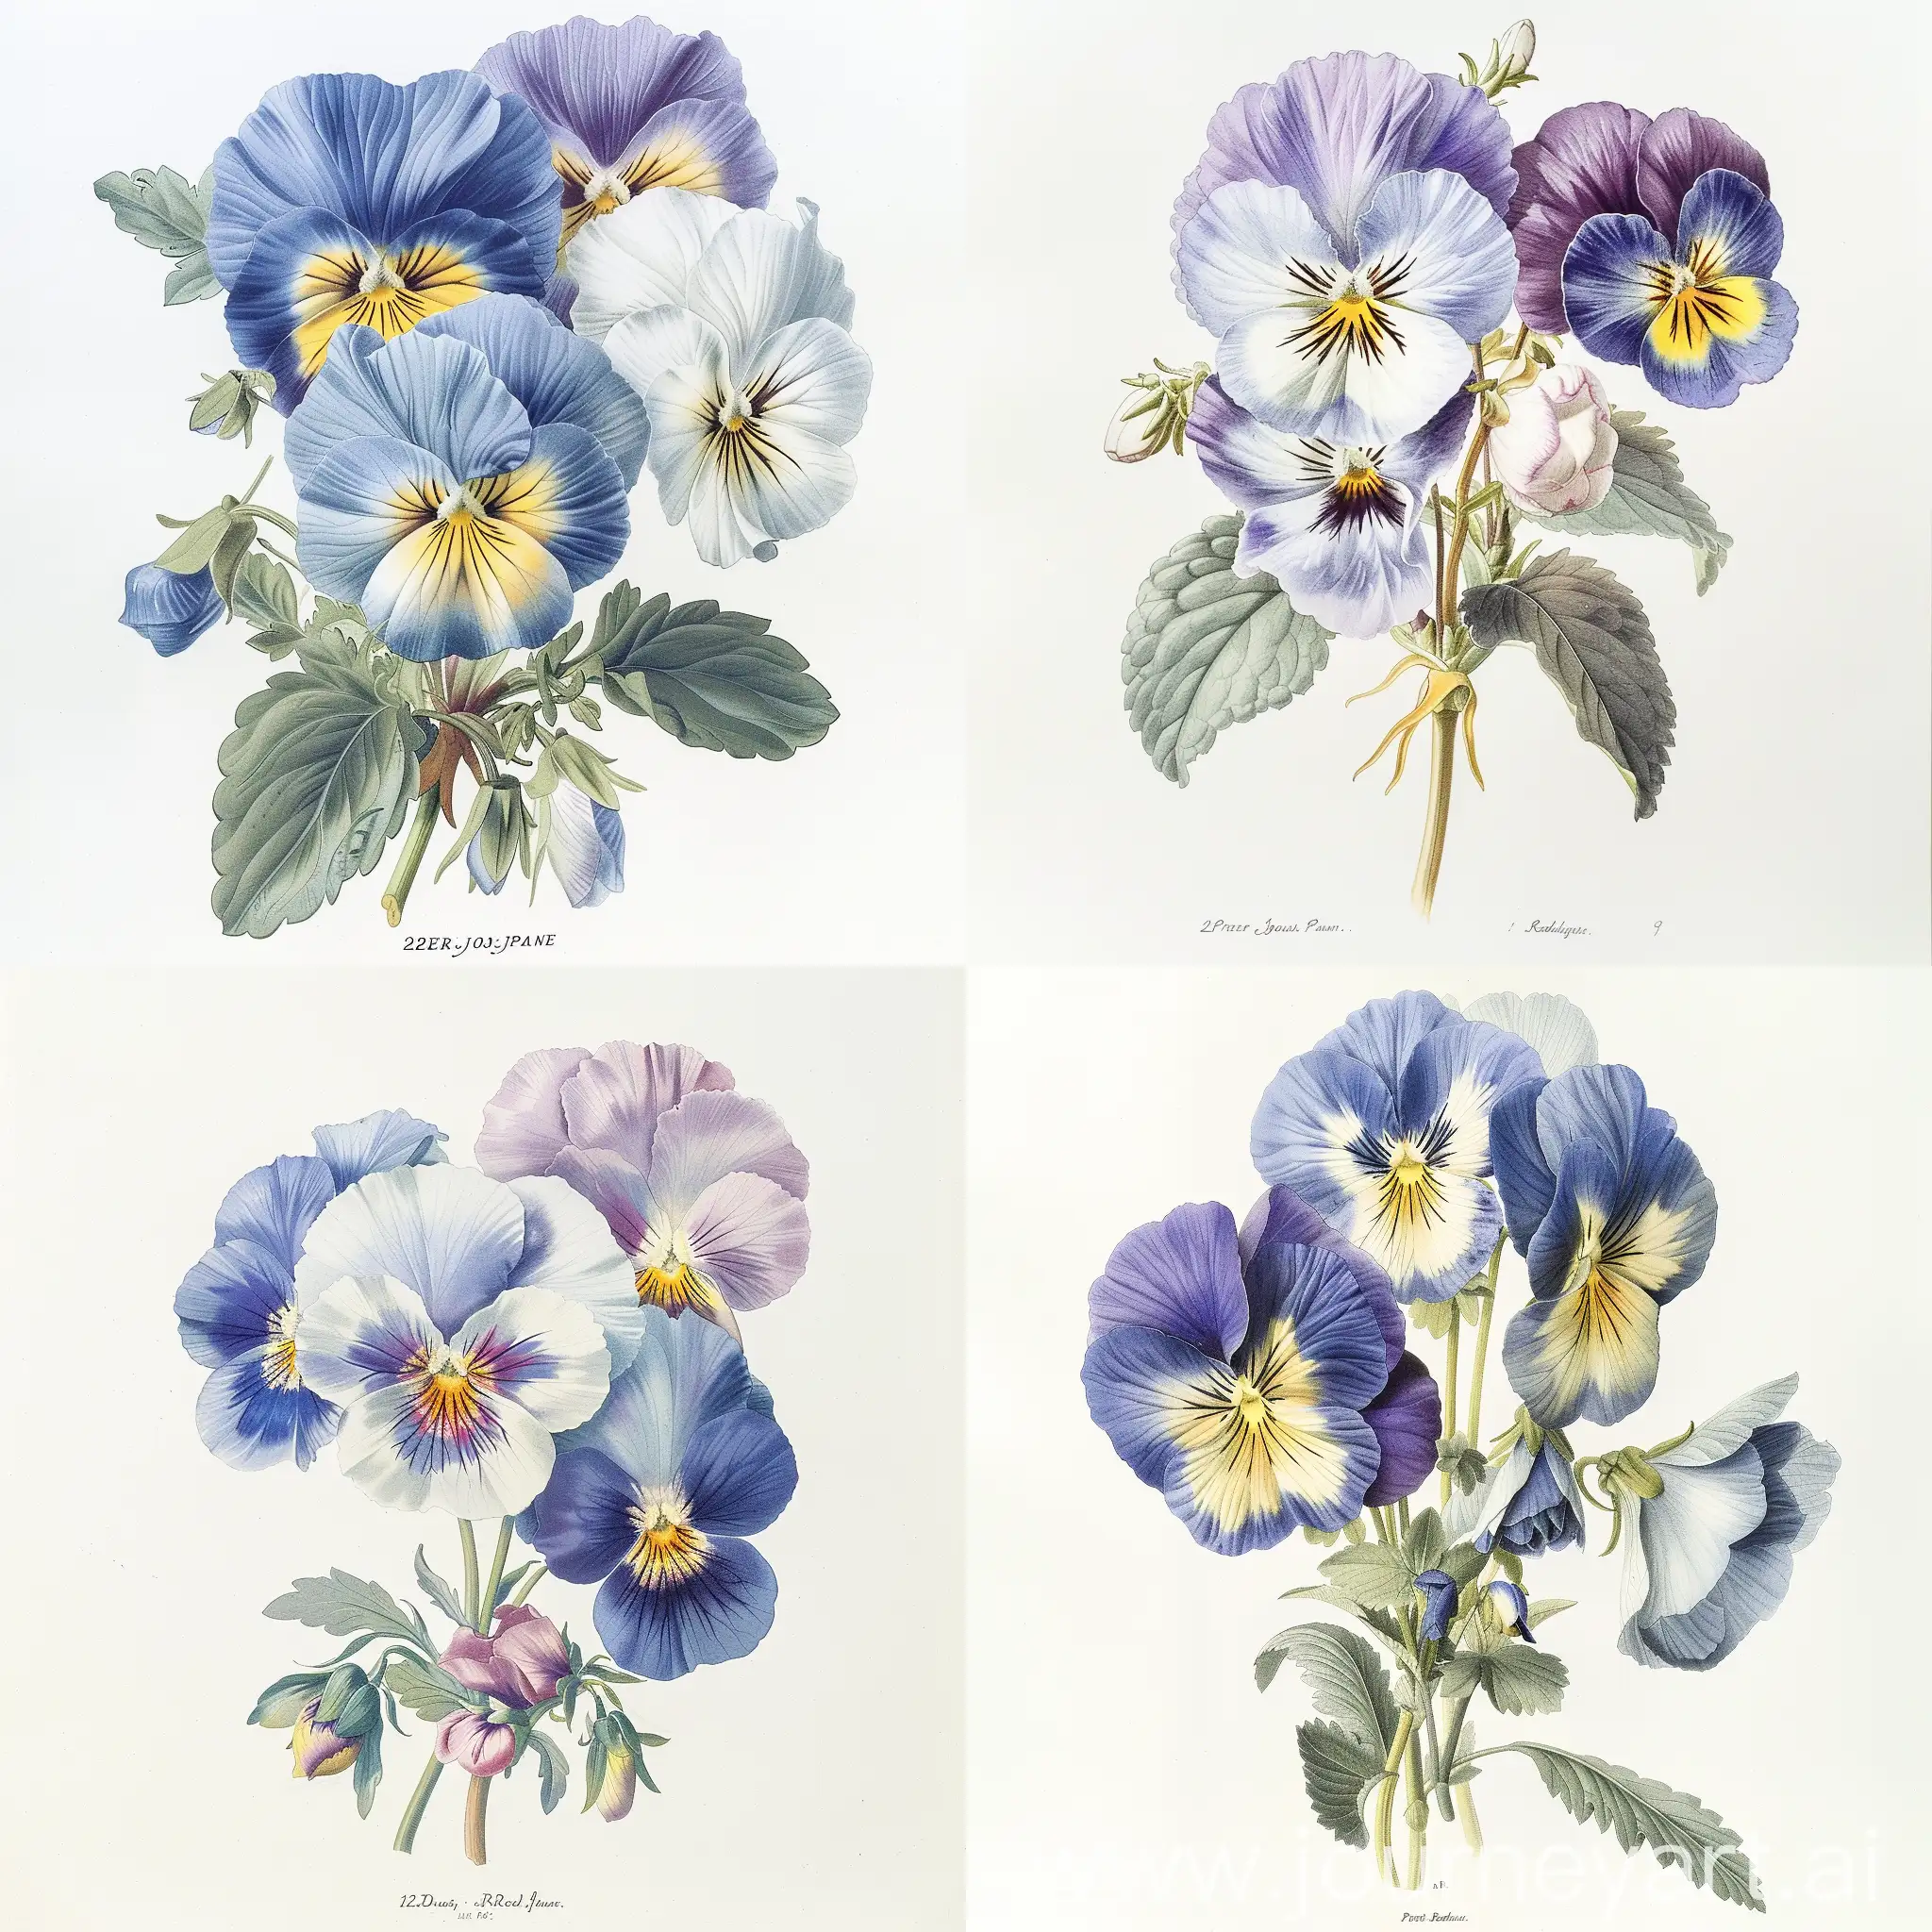 Botanical-Illustration-Exquisite-Pansy-Watercolor-Sketch-by-Pierre-Joseph-Redoute